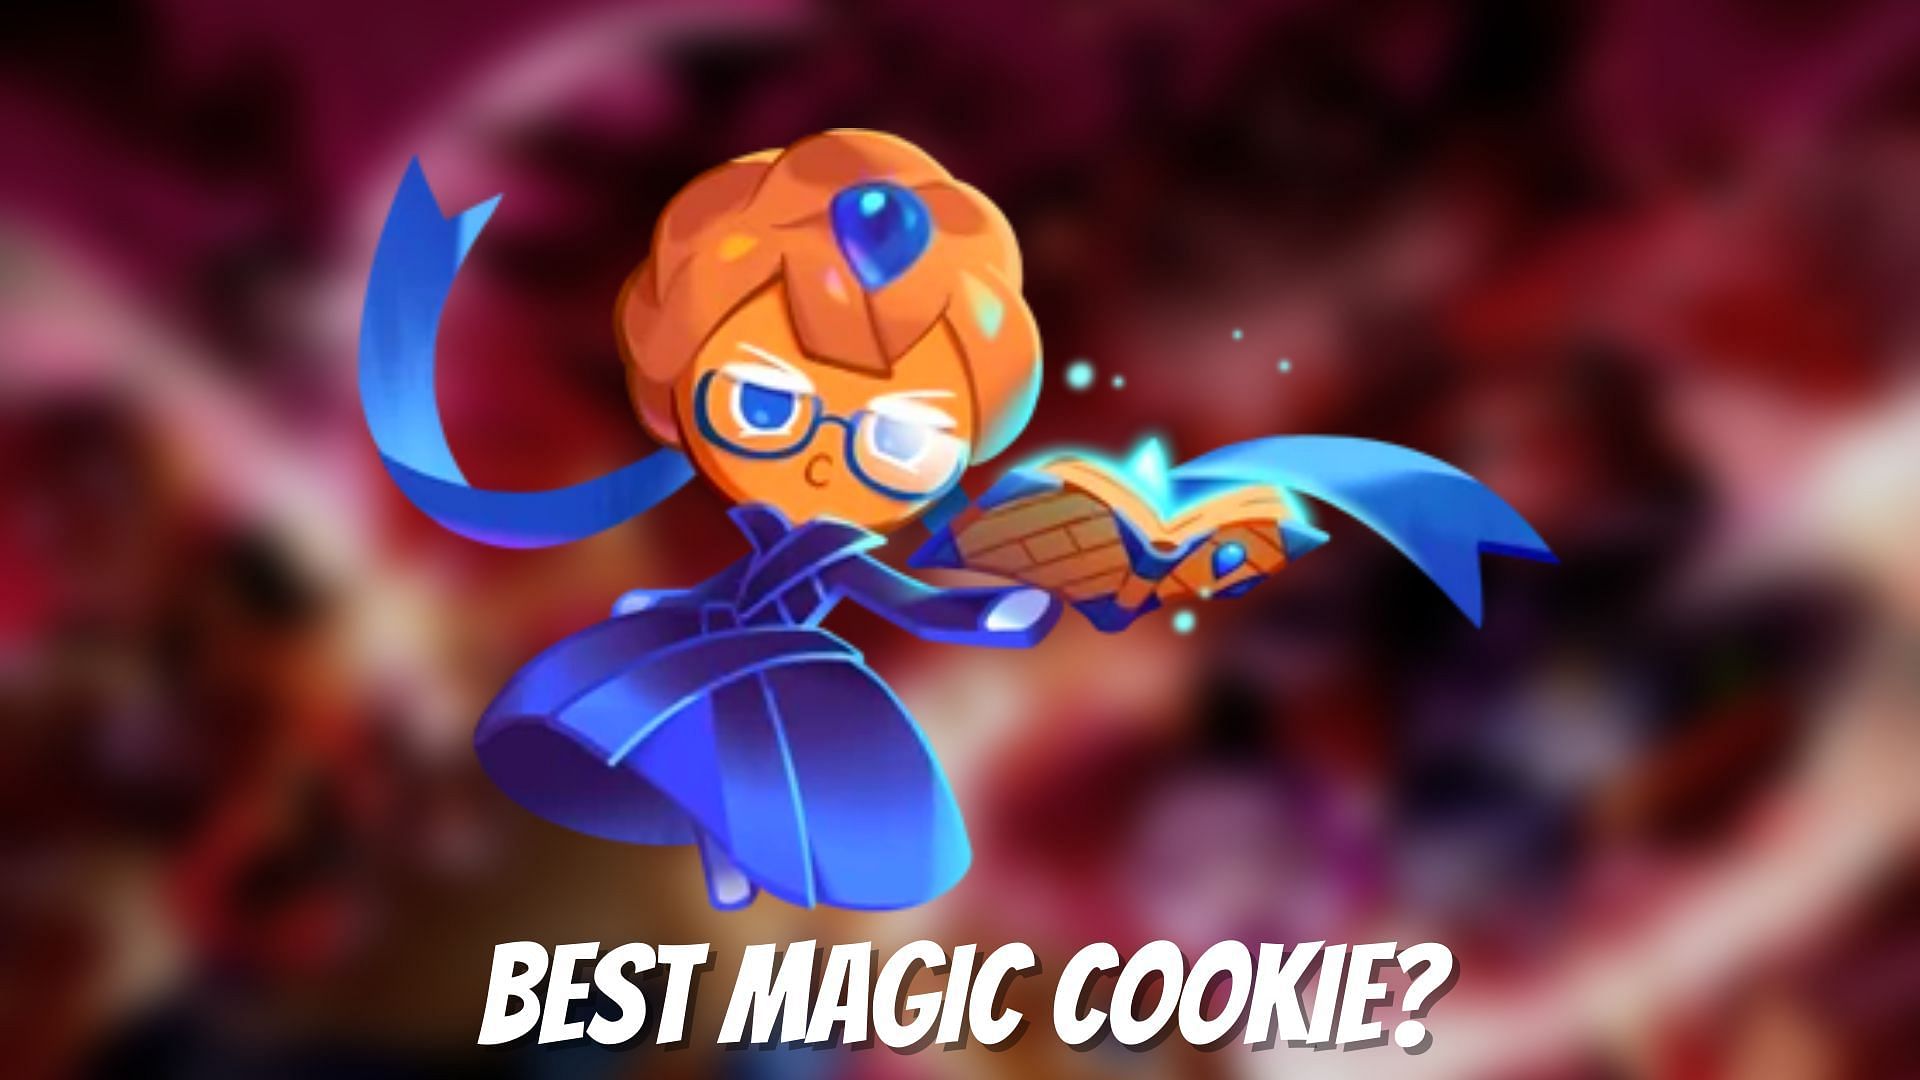 Best Blueberry Pie Cookie Topping In Cookie Run Kingdom 